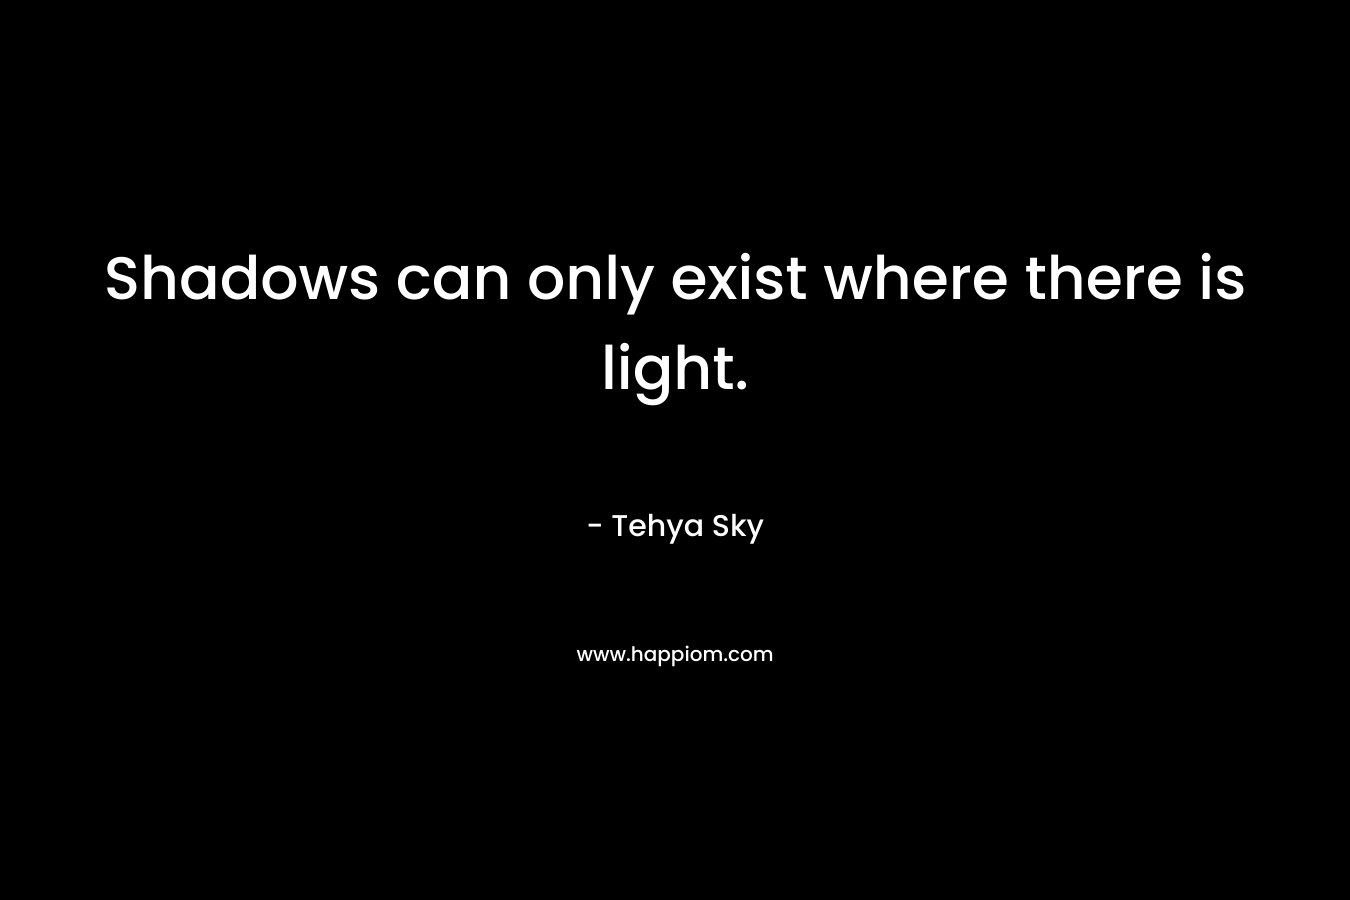 Shadows can only exist where there is light. – Tehya Sky